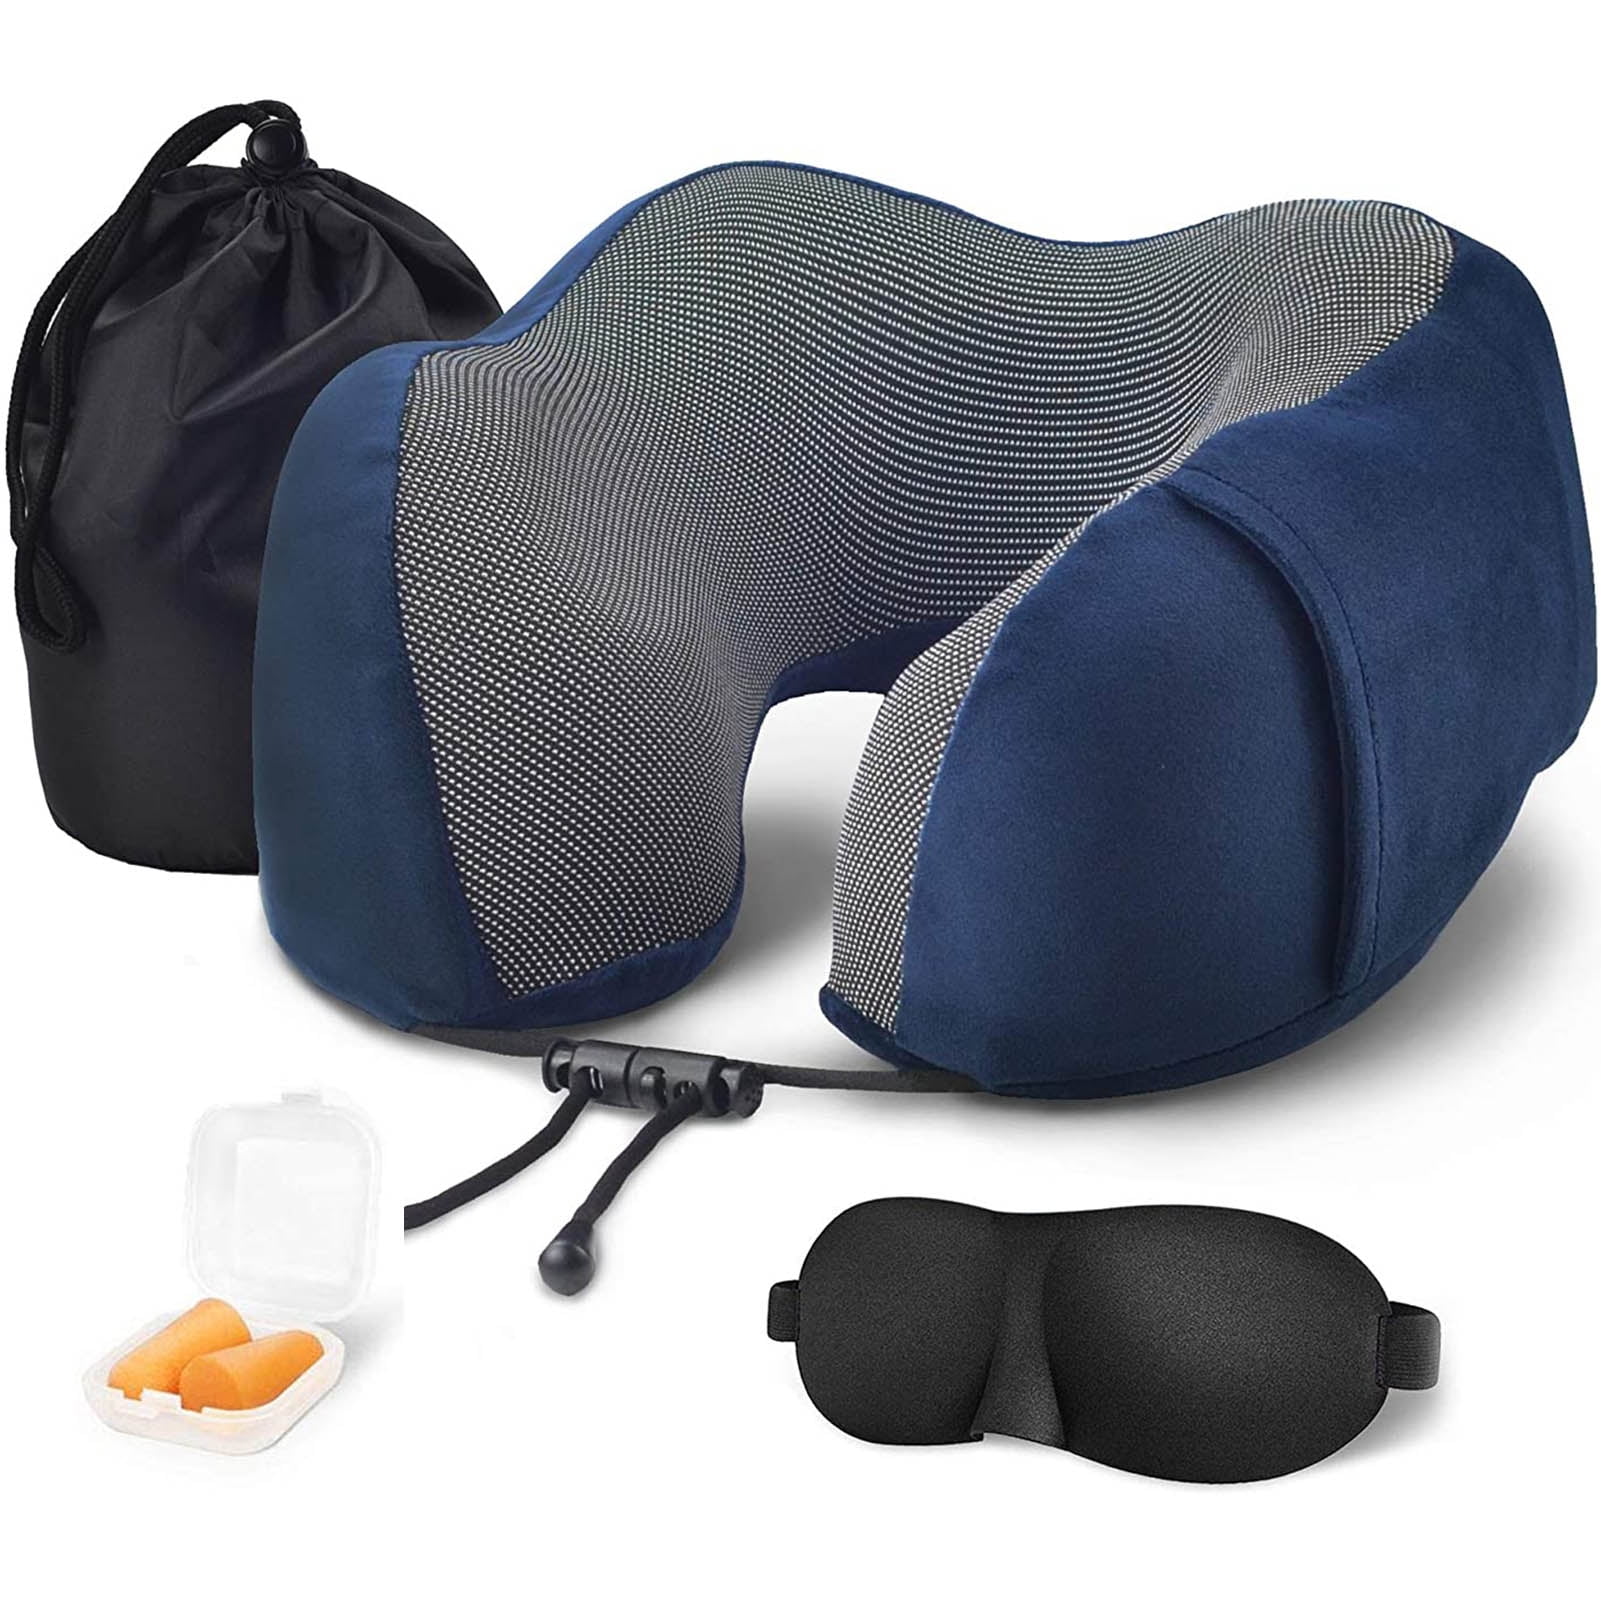 Inflatable Travel Neck Support Pillow with Soft Material Travel Air Plane Sleep 